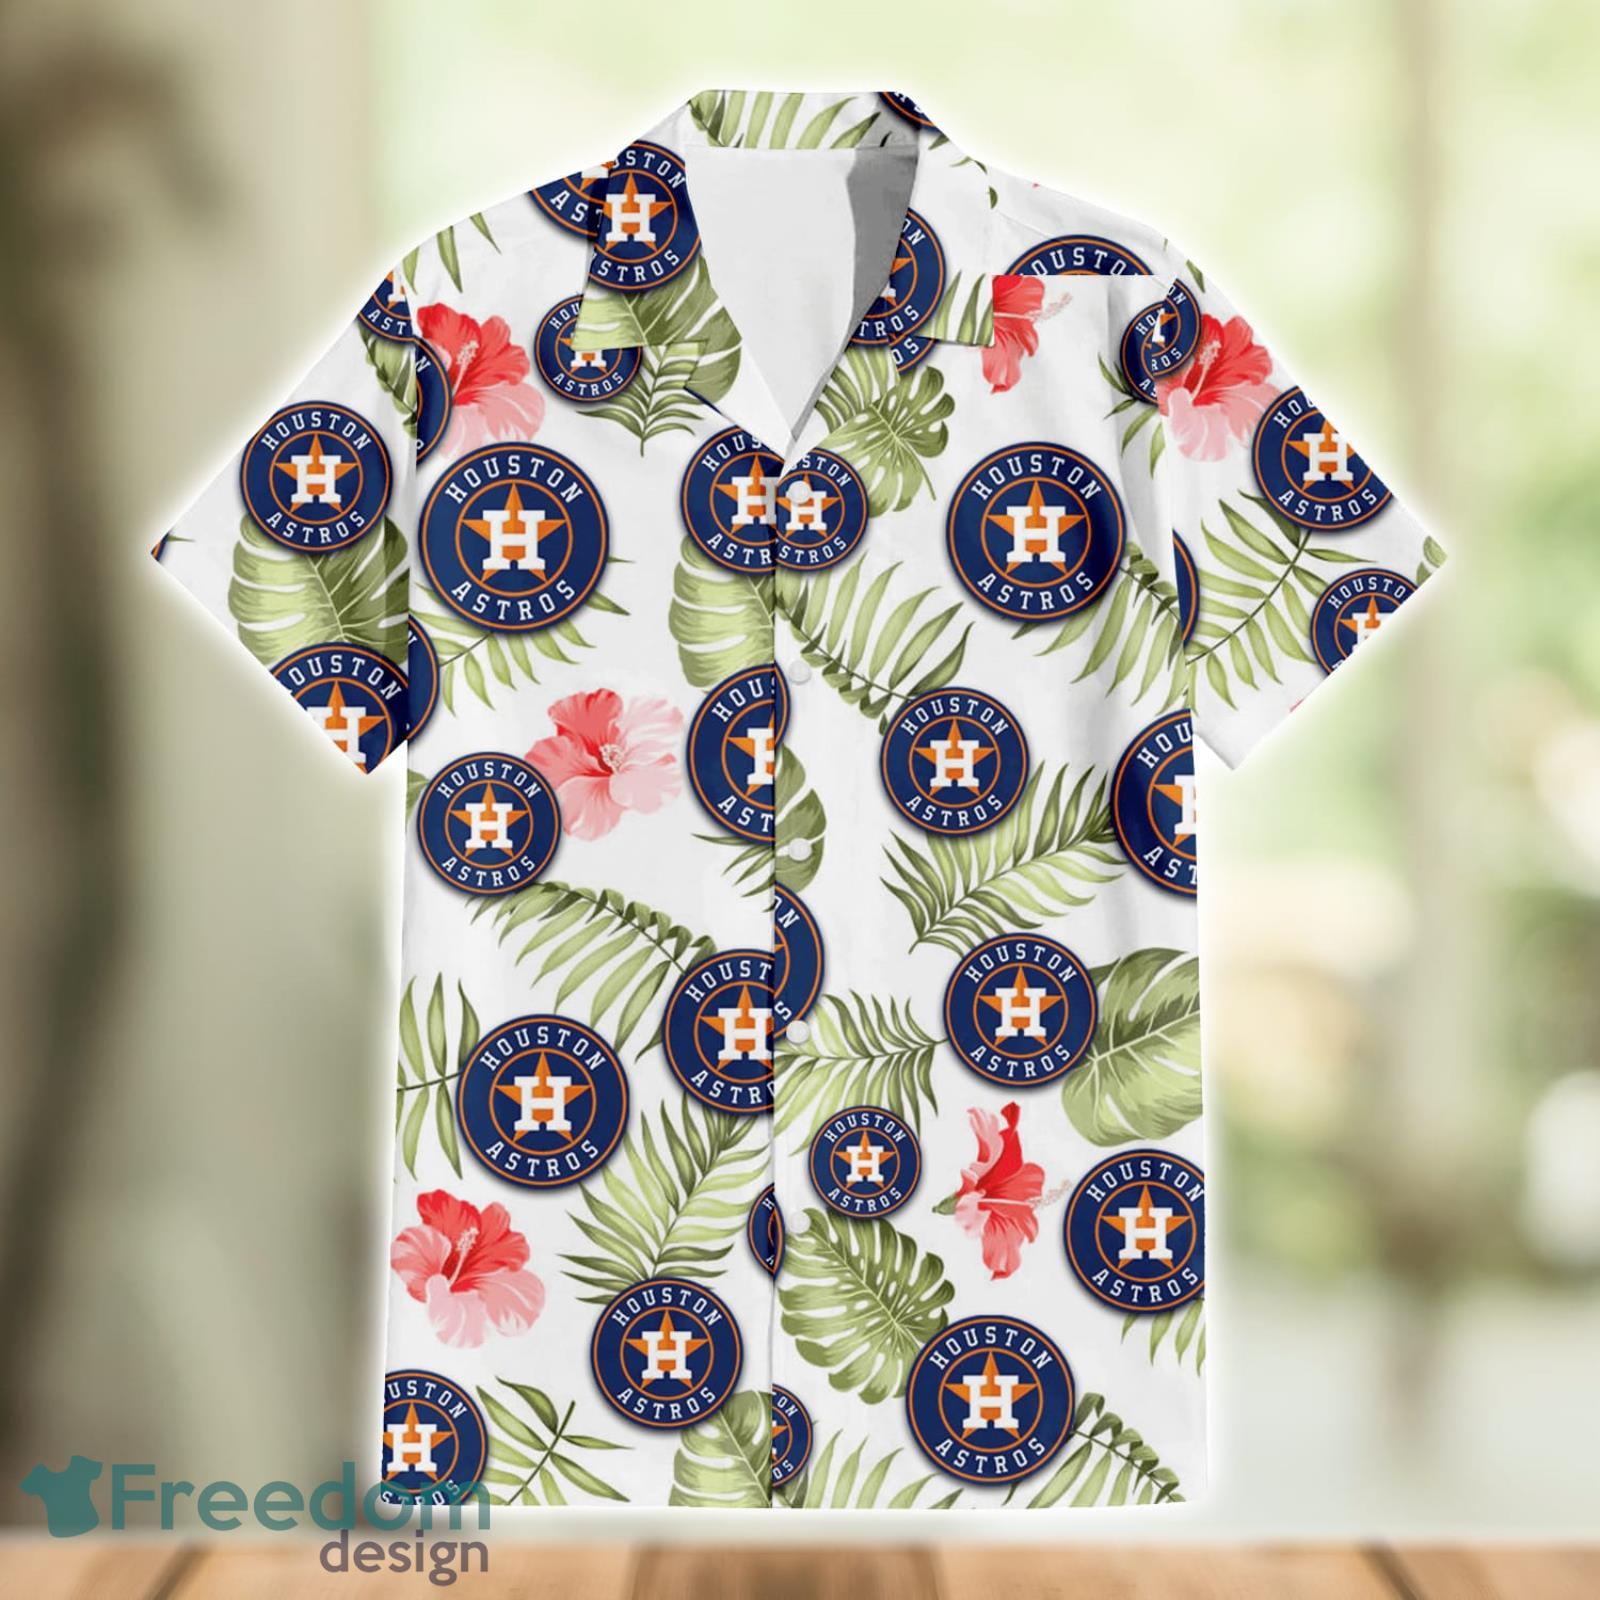 Houston Astros MLB Jersey Shirt Custom Number And Name For Men And Women  Gift Fans - Freedomdesign